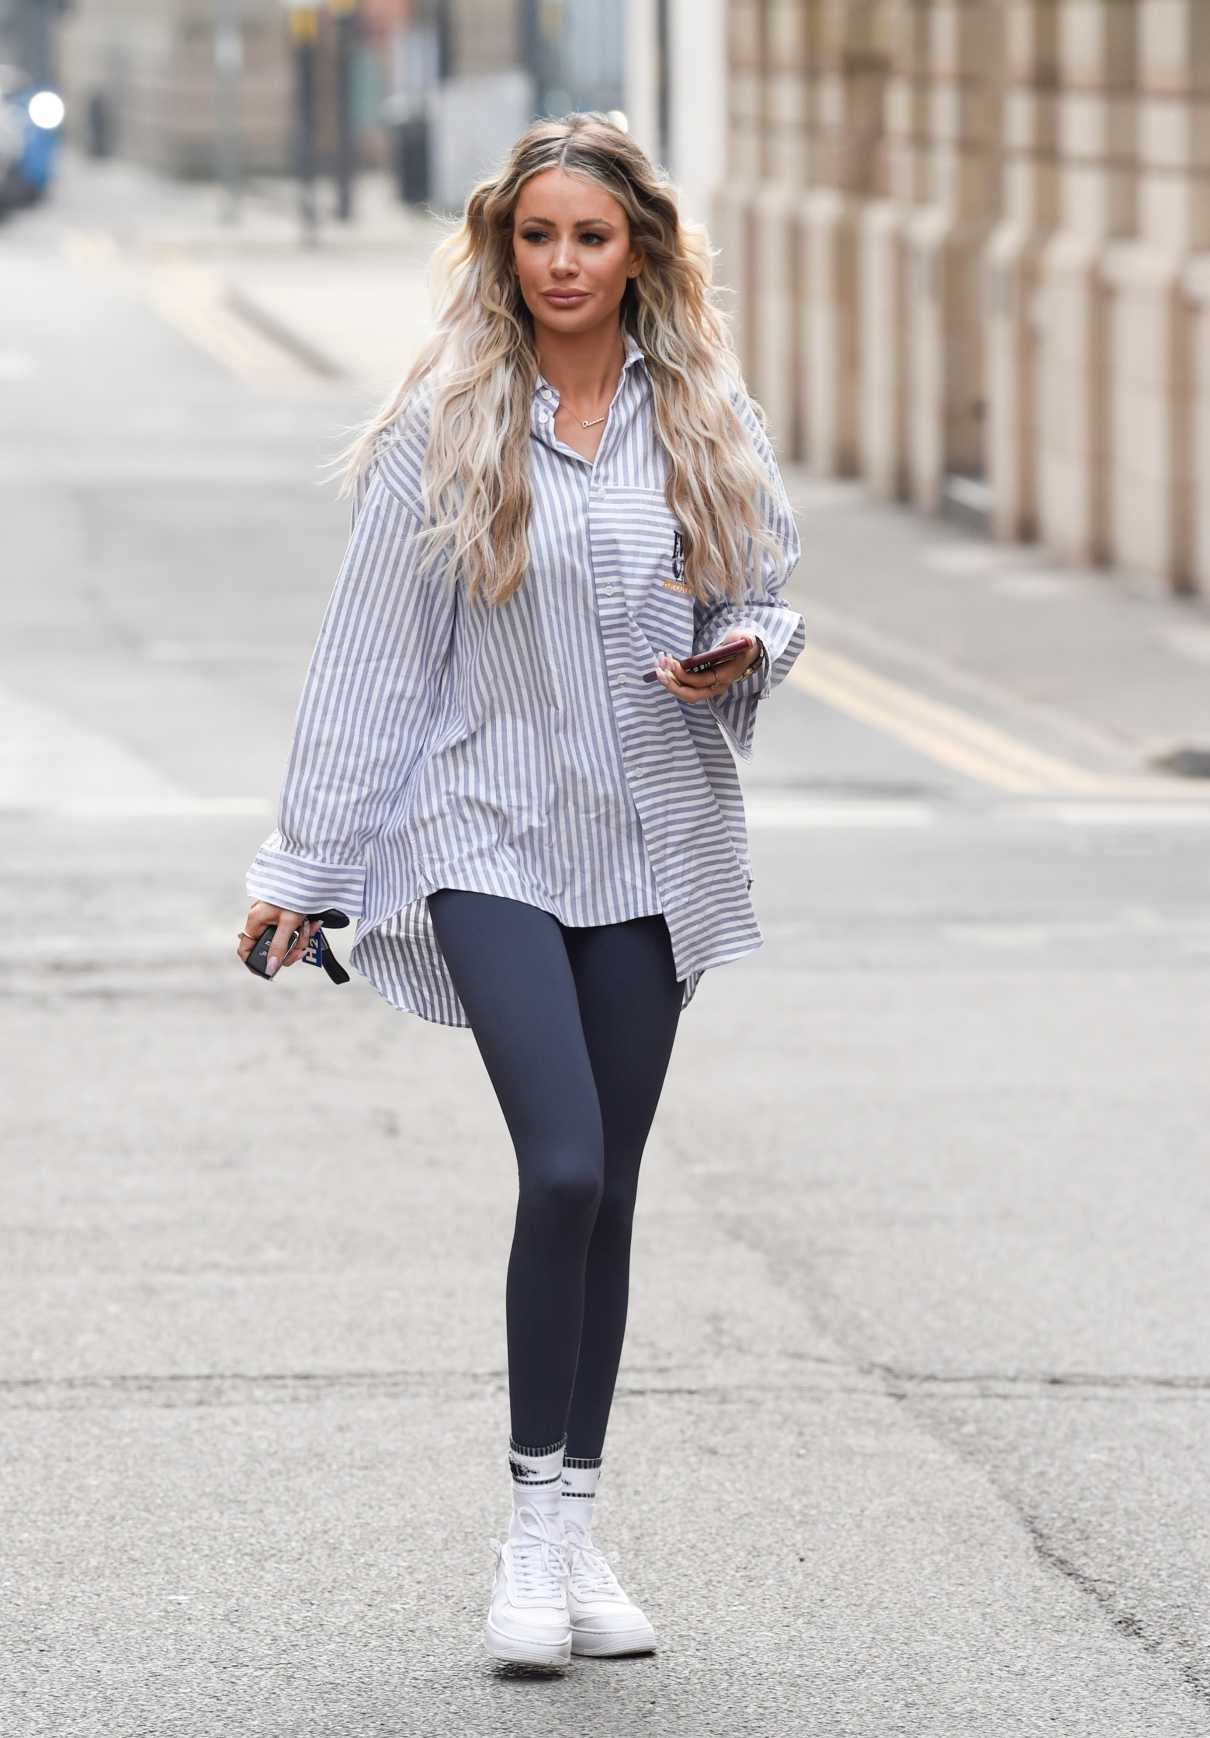 Olivia Attwood in a White Sneakers